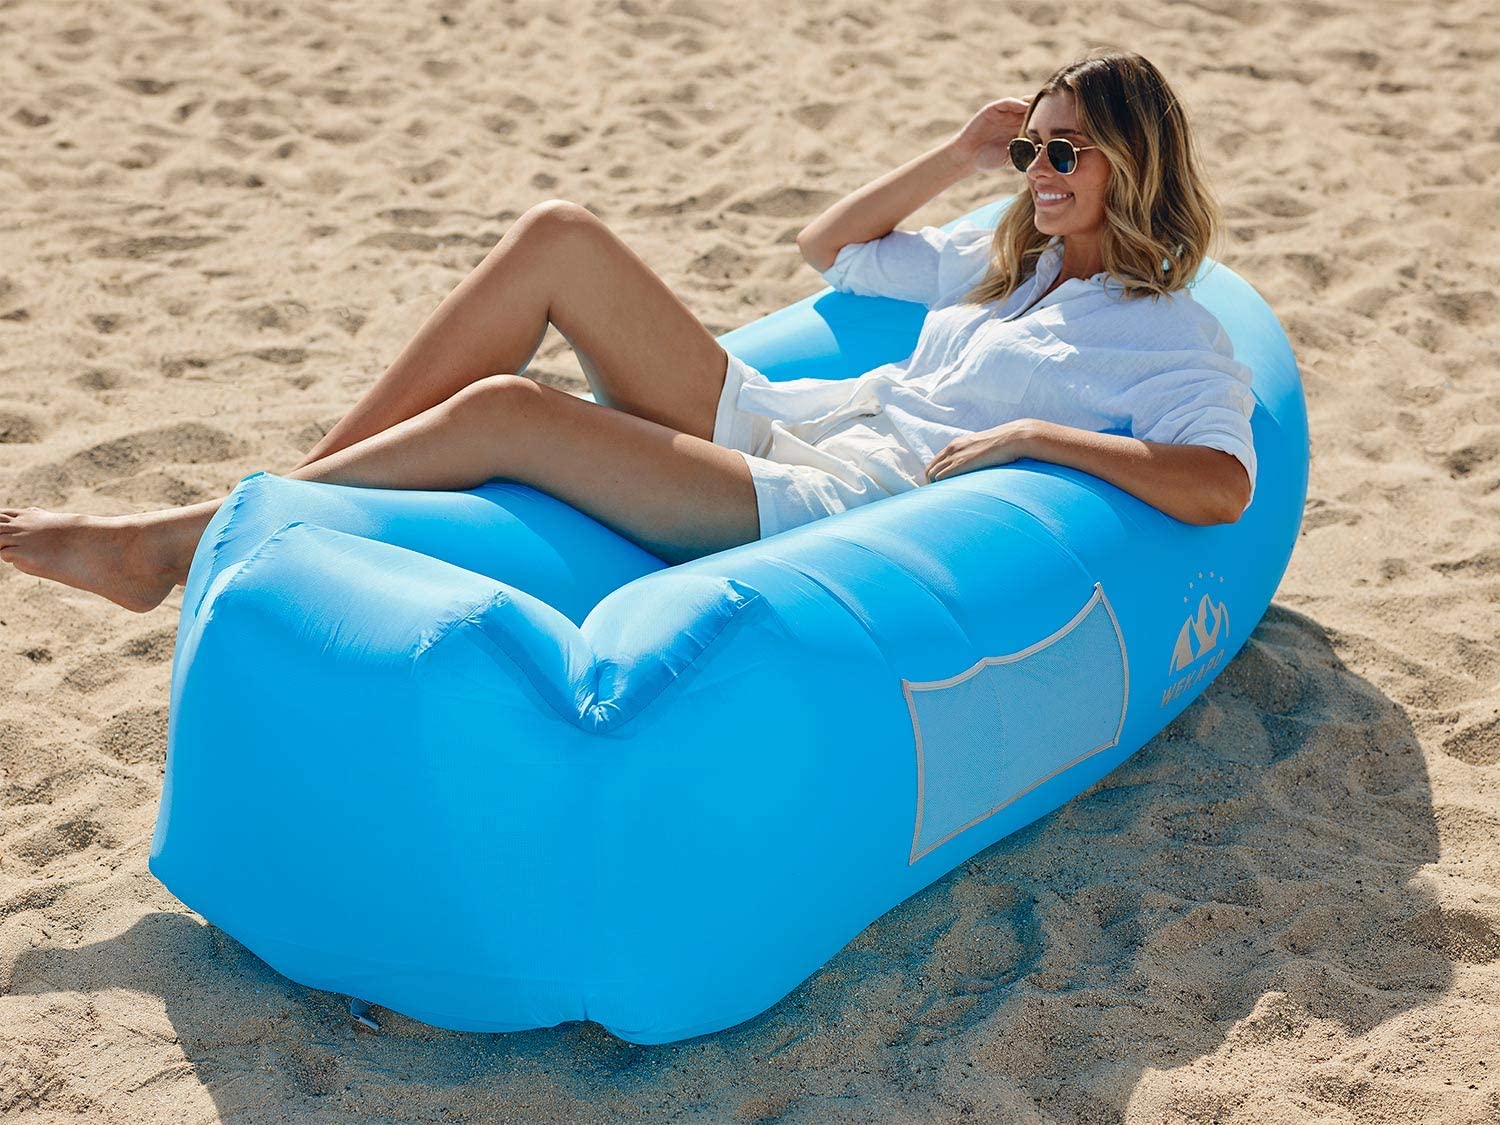 HUOU Inflatable lounger Blue 2019 New Waterproof inflatable Sofa with Storage Bag Air Sofa lounger Hammock with Headrest Inflatable Couch fit for Travelling,Camping,Pool and Beach 